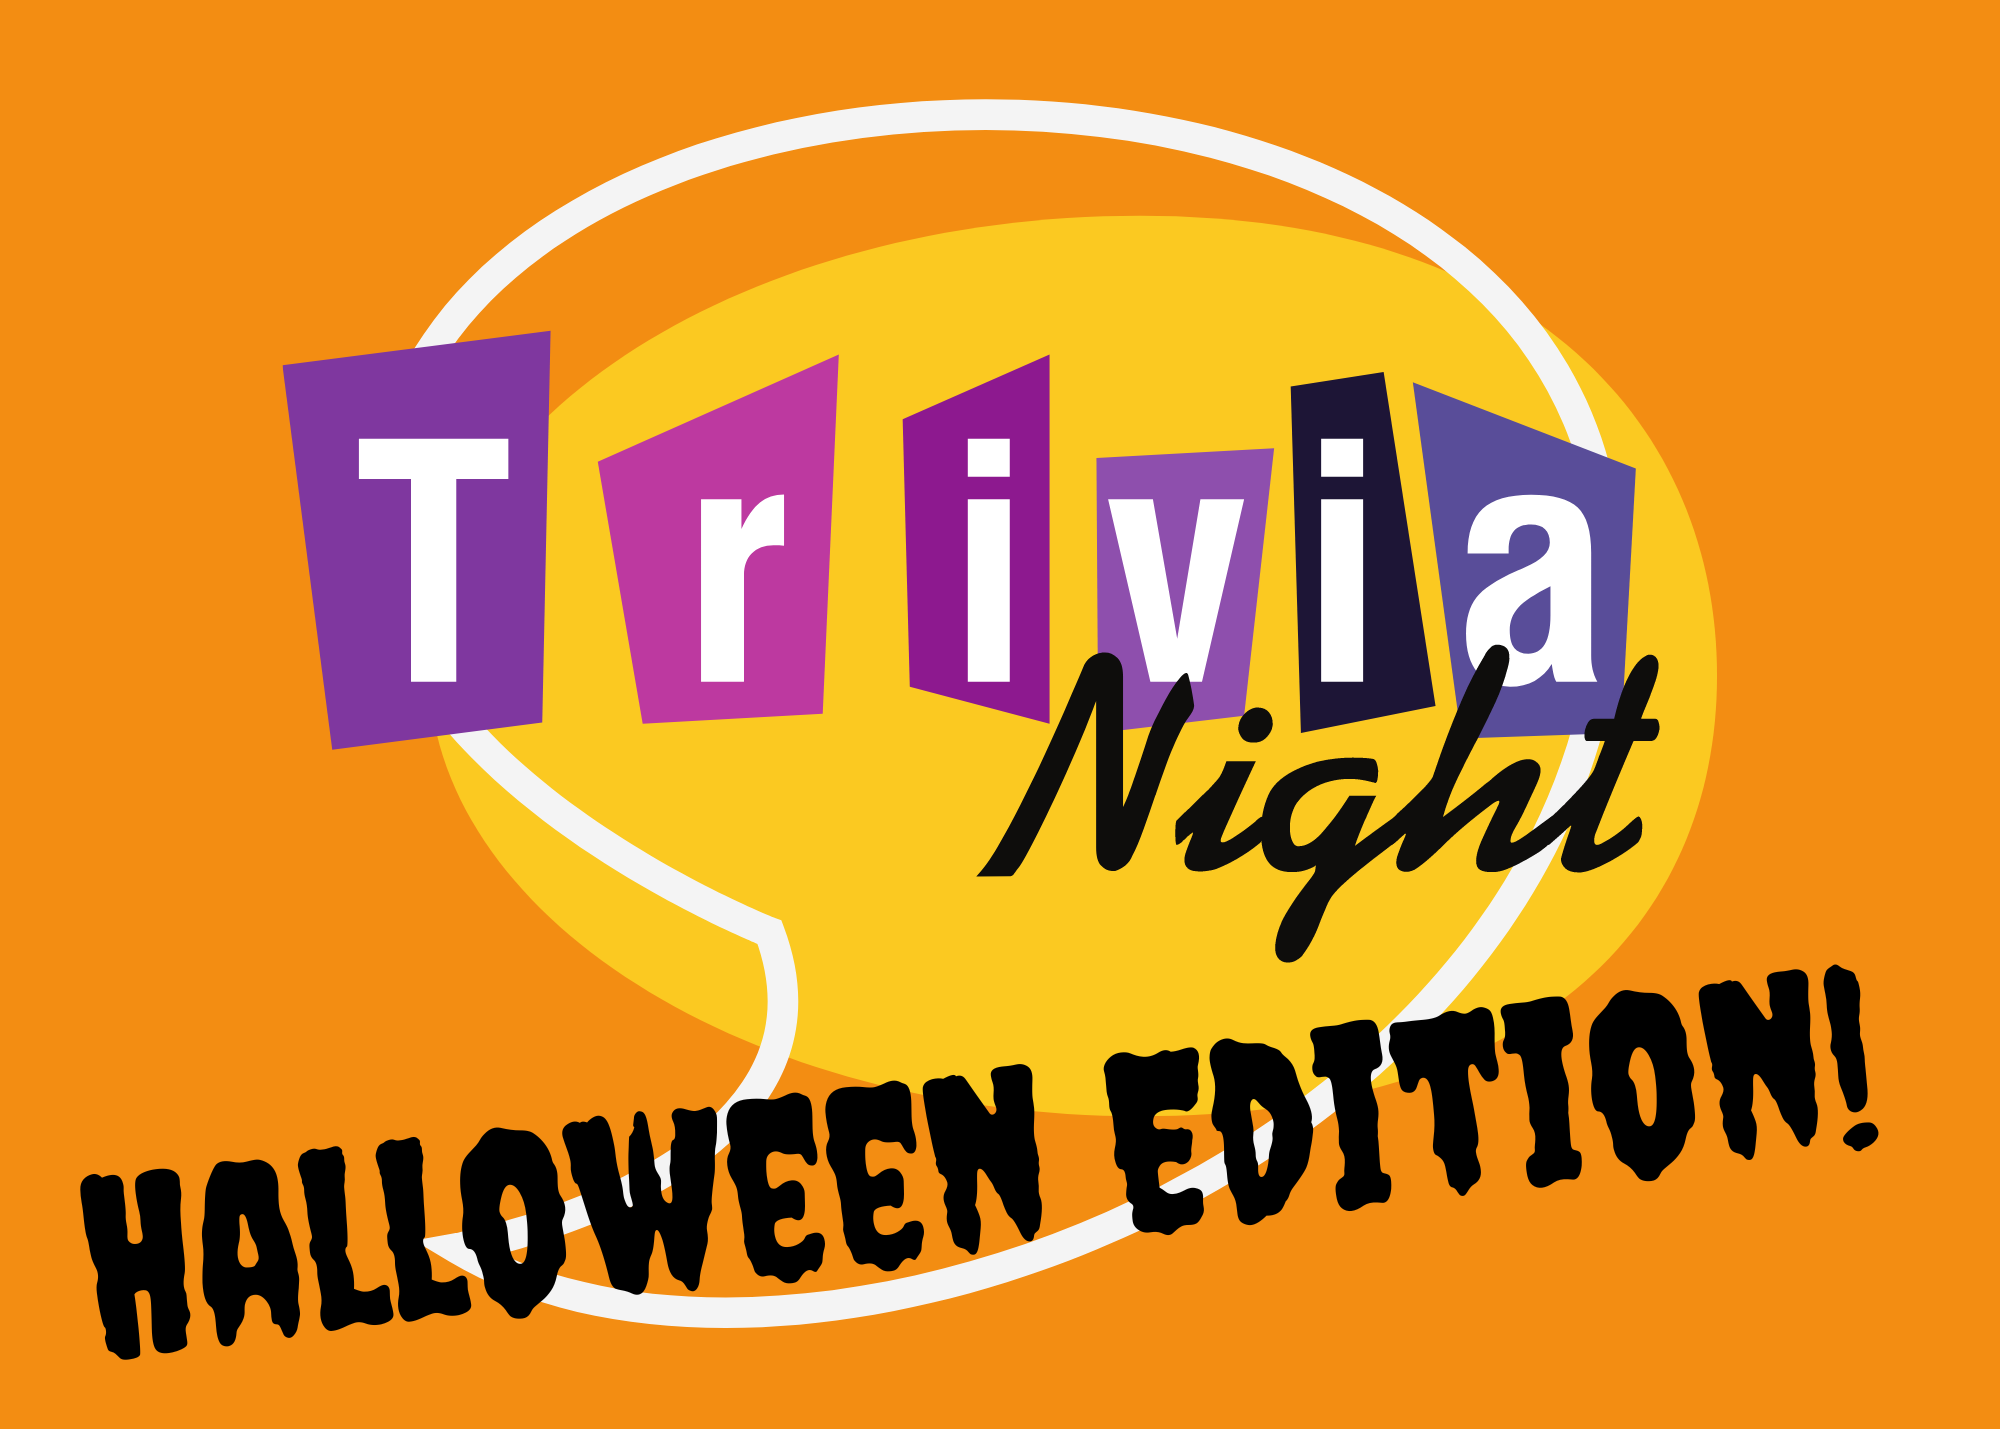 The text "Trivia Night: Halloween Edition!" on a yellow speech bubble with an orange background. The text has a retro game show vibe.